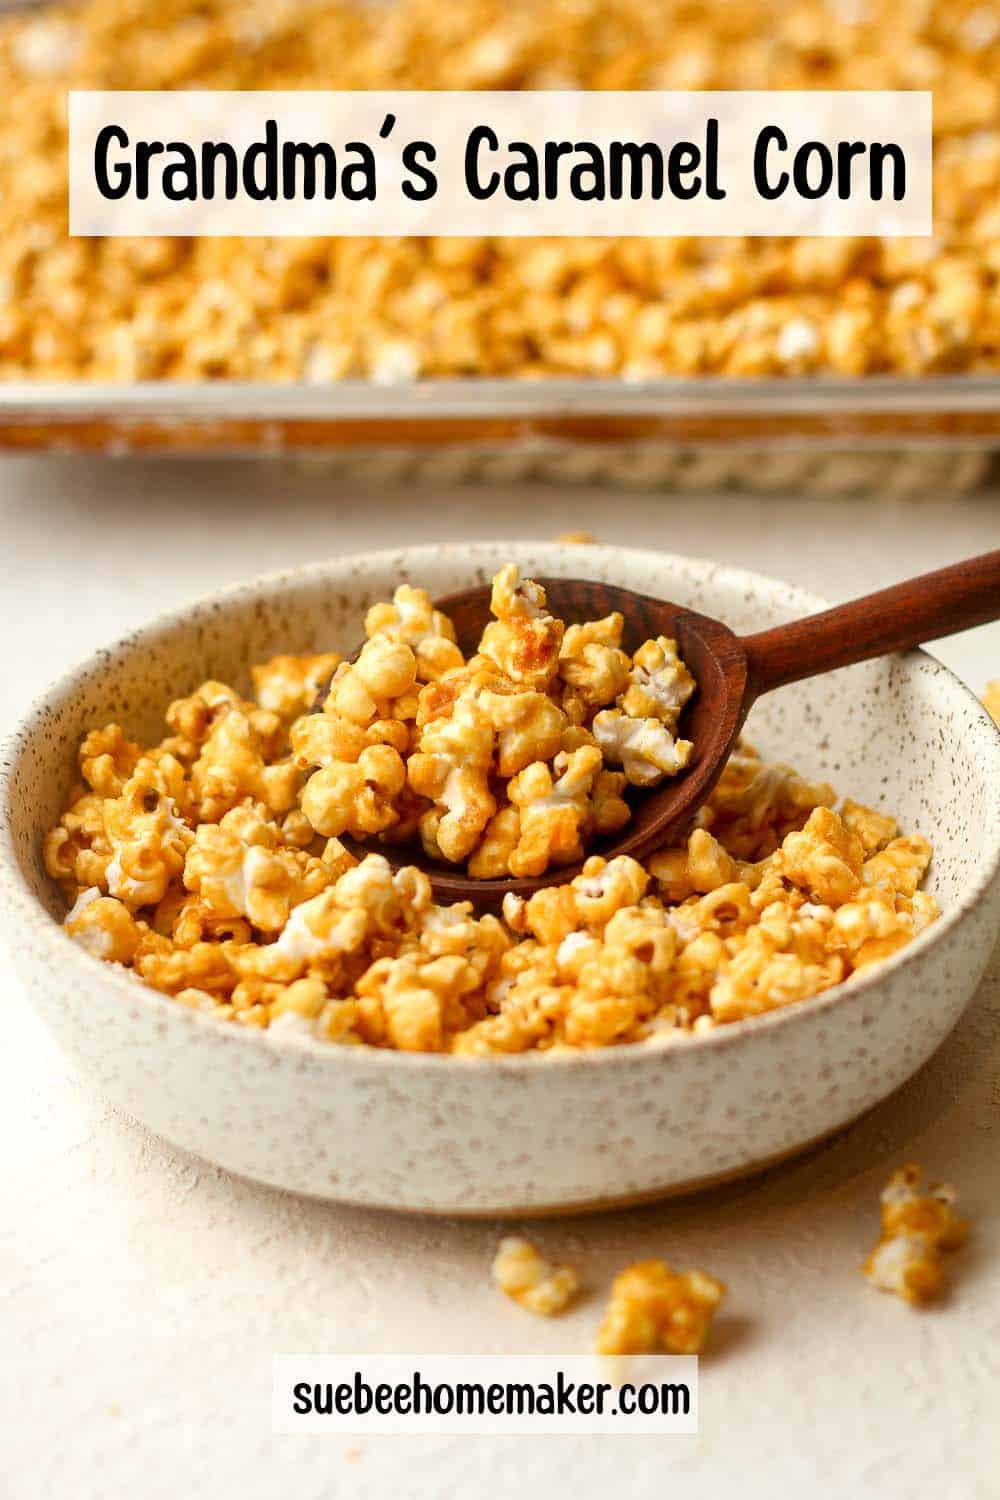 Side view of a bowl of Grandma's caramel corn in front of a pan.